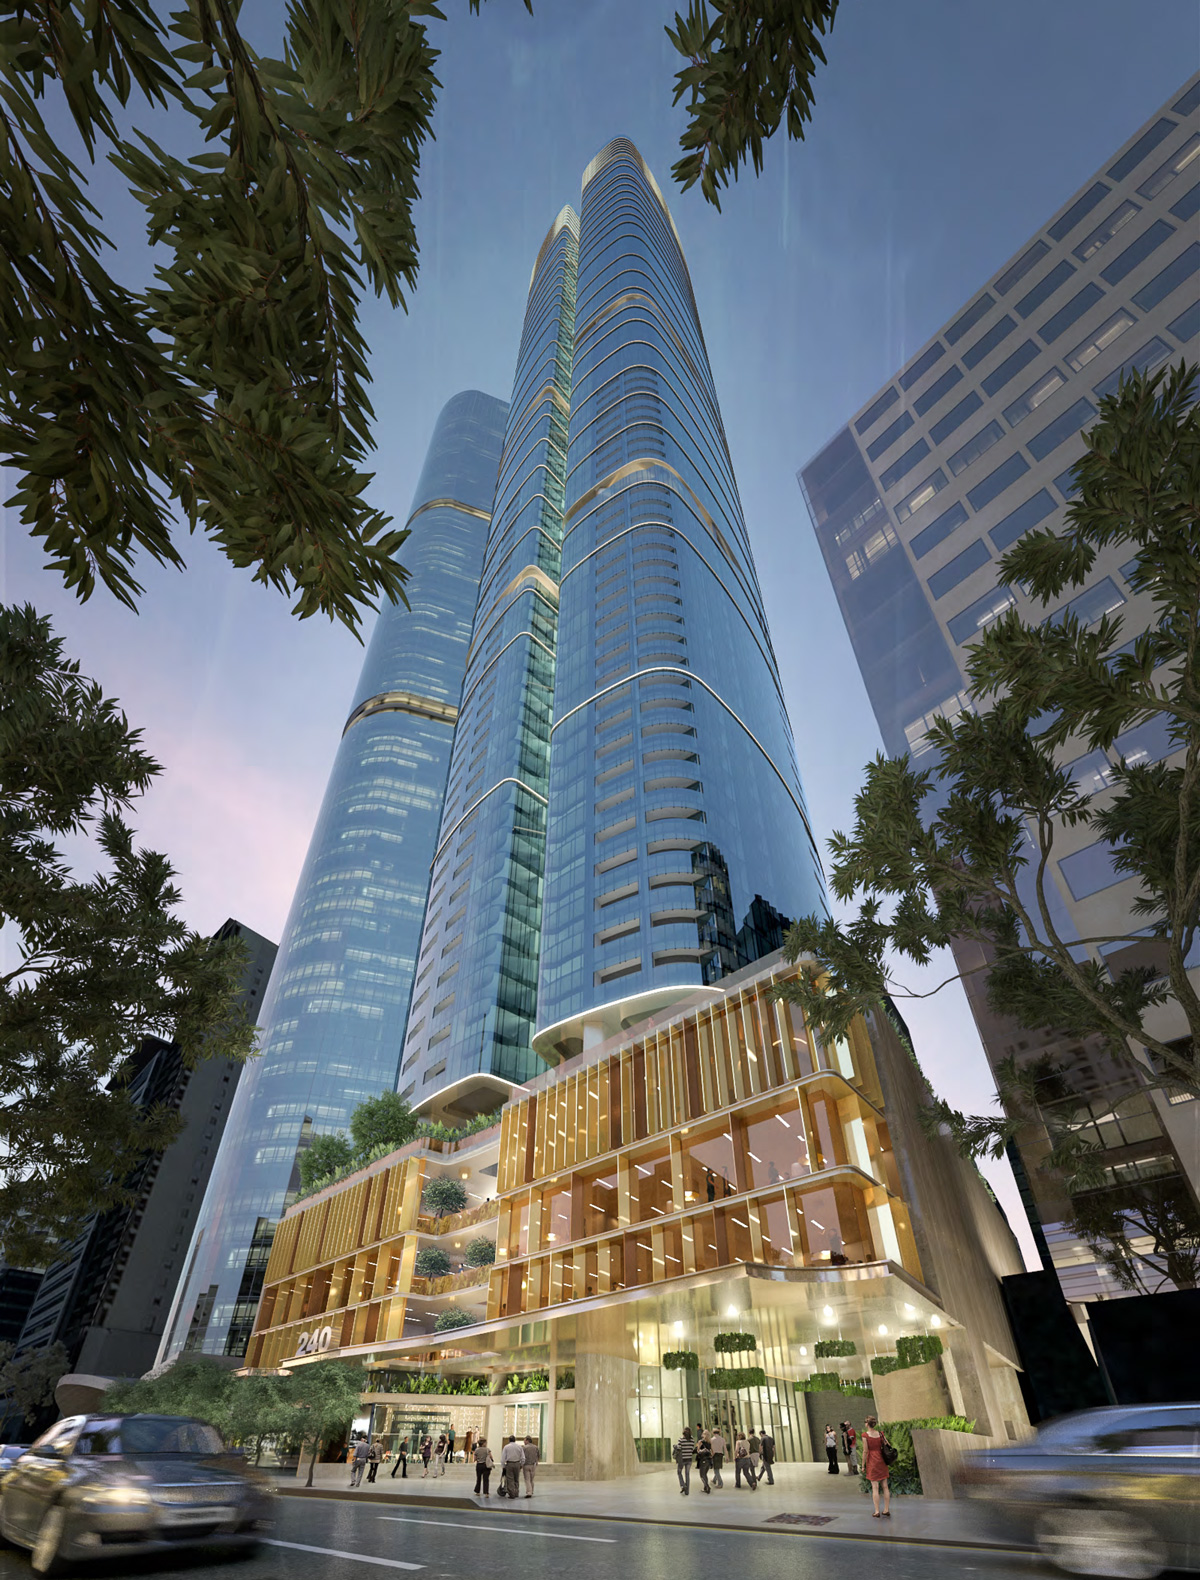 Artist's impression of tower from ground level.